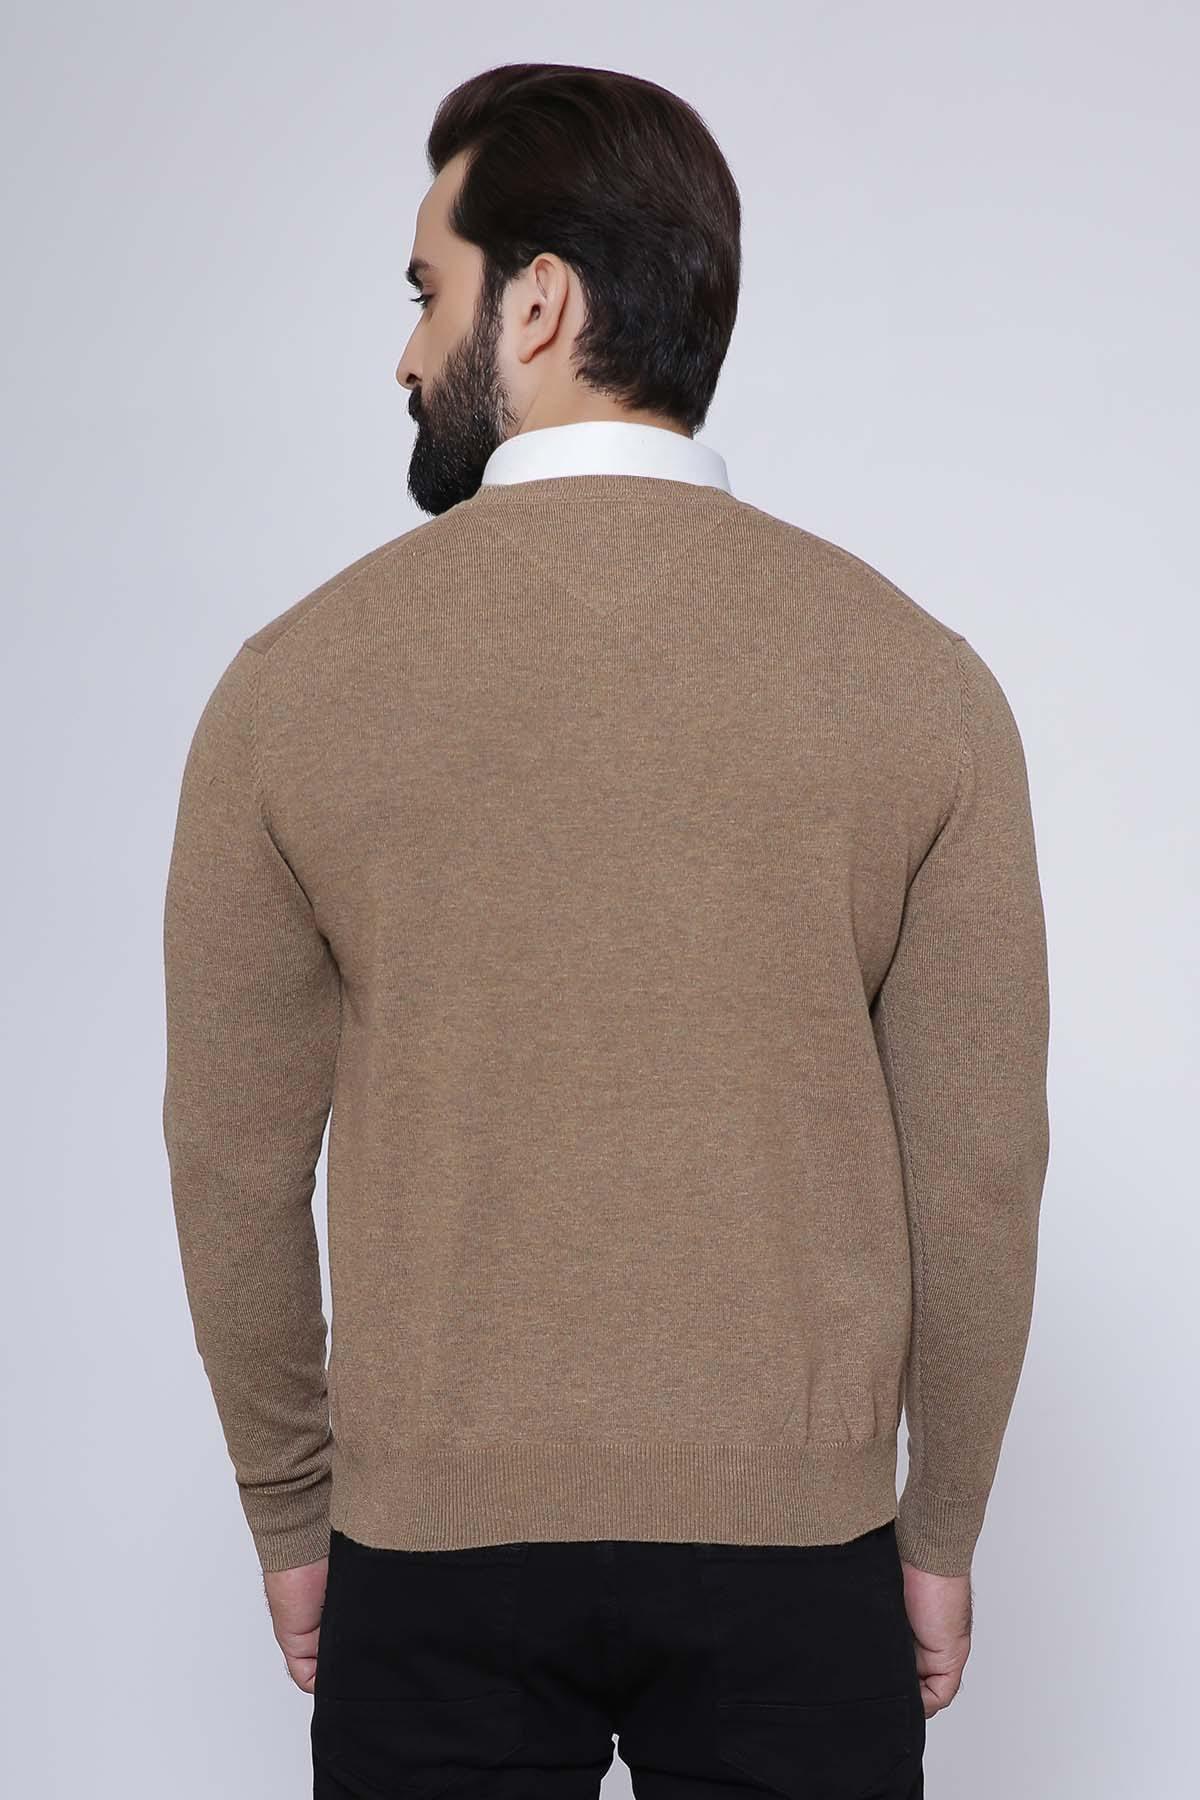 SWEATER V NECK FULL SLEEVE LIGHT BROWN at Charcoal Clothing